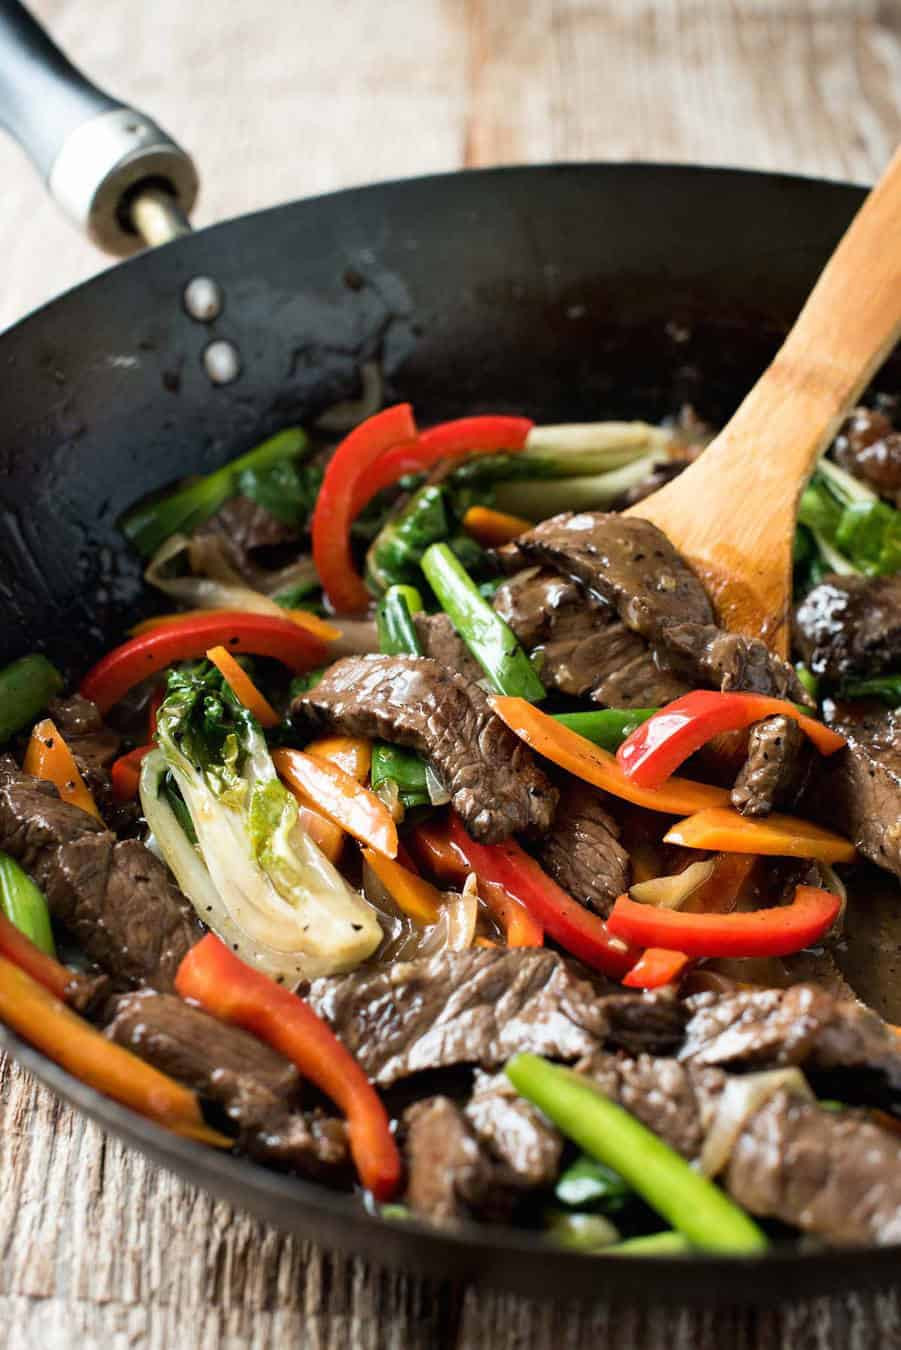 Asian Stir Fry Sauces Recipes
 Easy Classic Chinese Beef Stir Fry